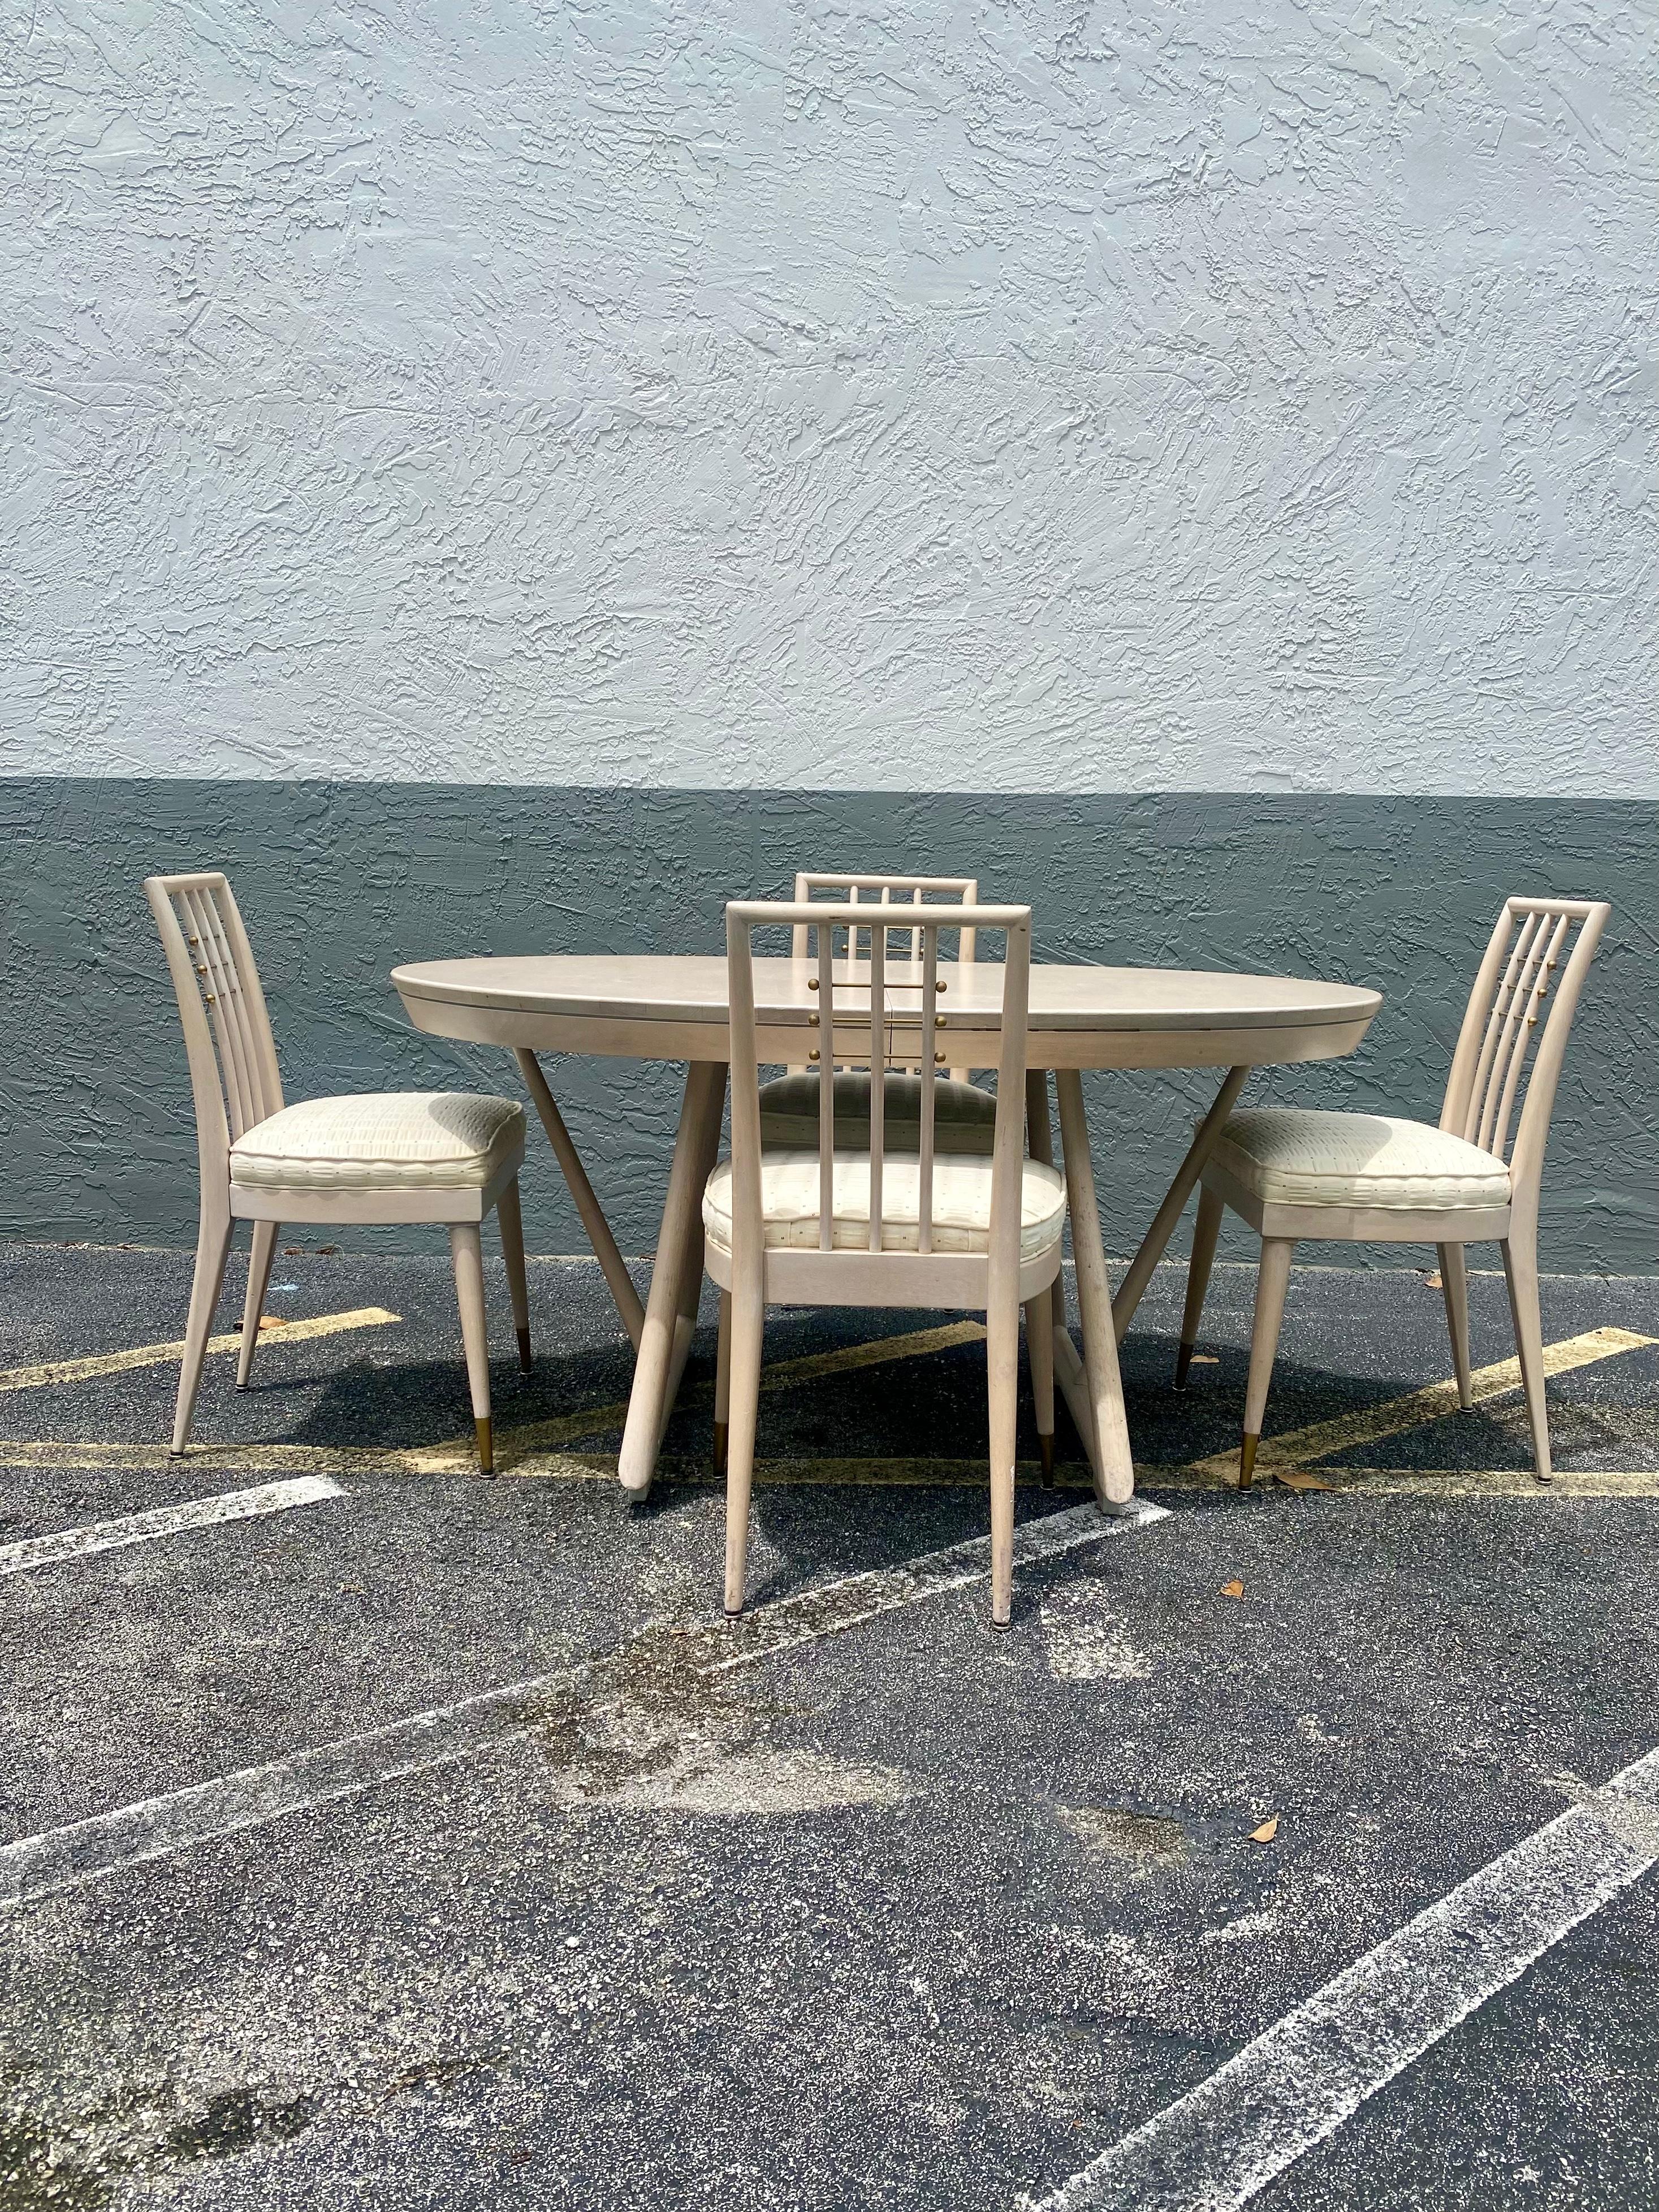 On offer on this occasion is one of the most stunning, extension dining table and wood chairs you could hope to find. This is an ultra-rare opportunity to acquire what is, unequivocally, the best of the best, it being a most spectacular and